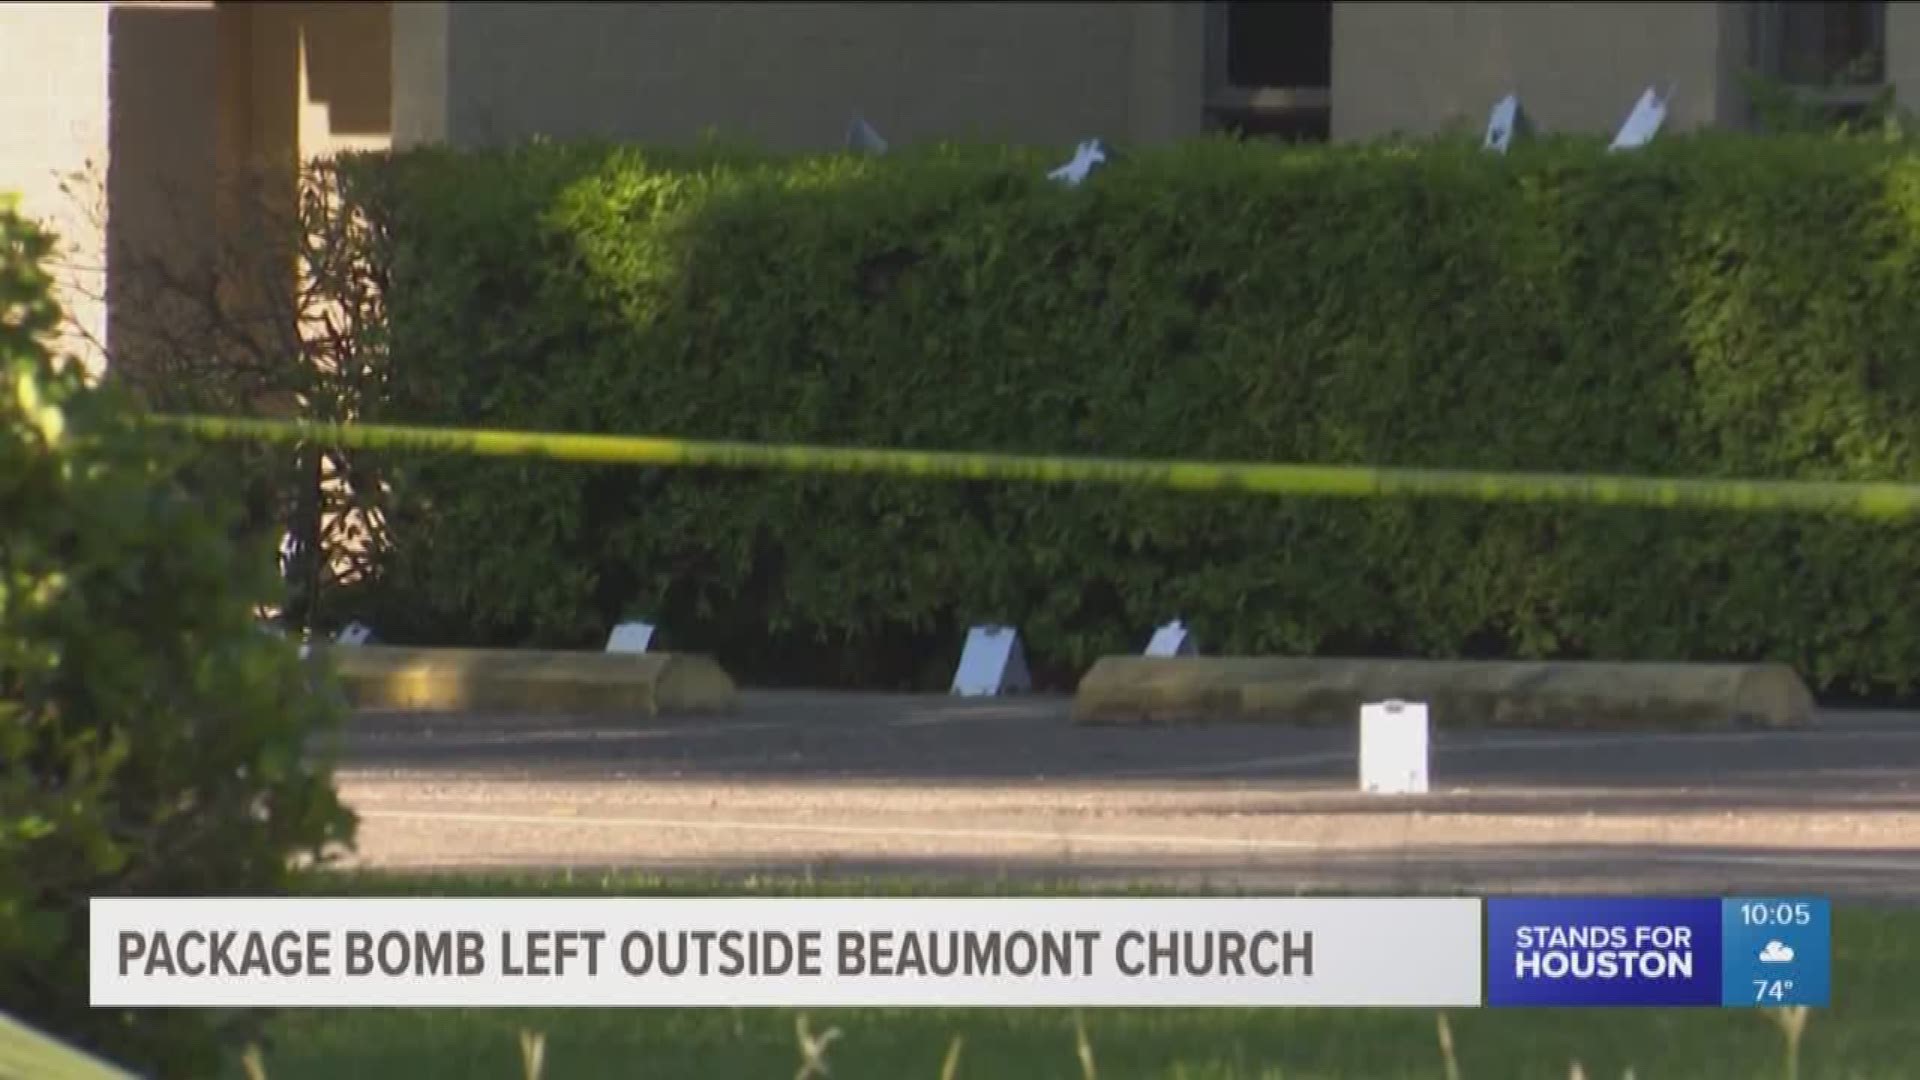 A Beaumont church was damaged on Thursday after a device detonated on the front steps of the building.